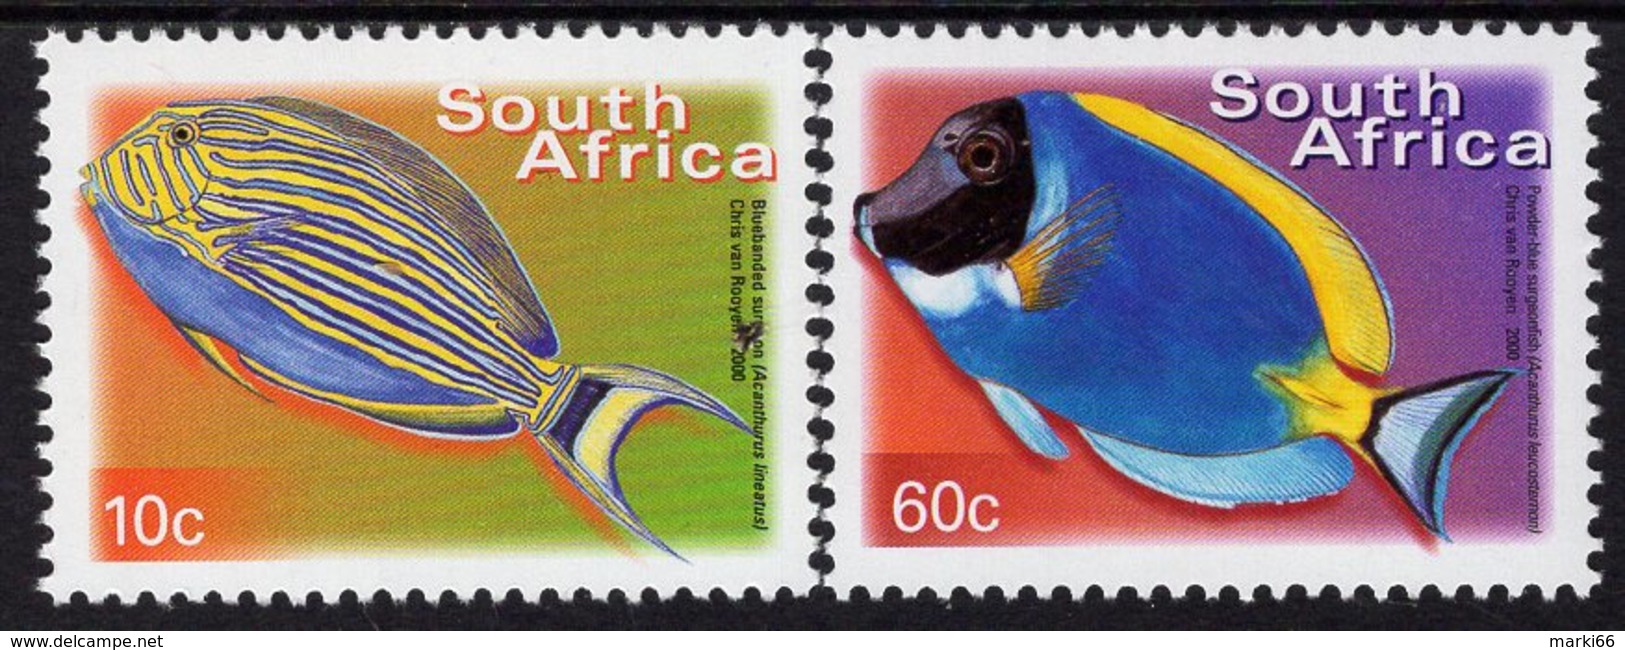 South Africa - 2014 - Colourful South Africa - Fish - 7th Definitive Series - Mint Stamp Set - Ungebraucht